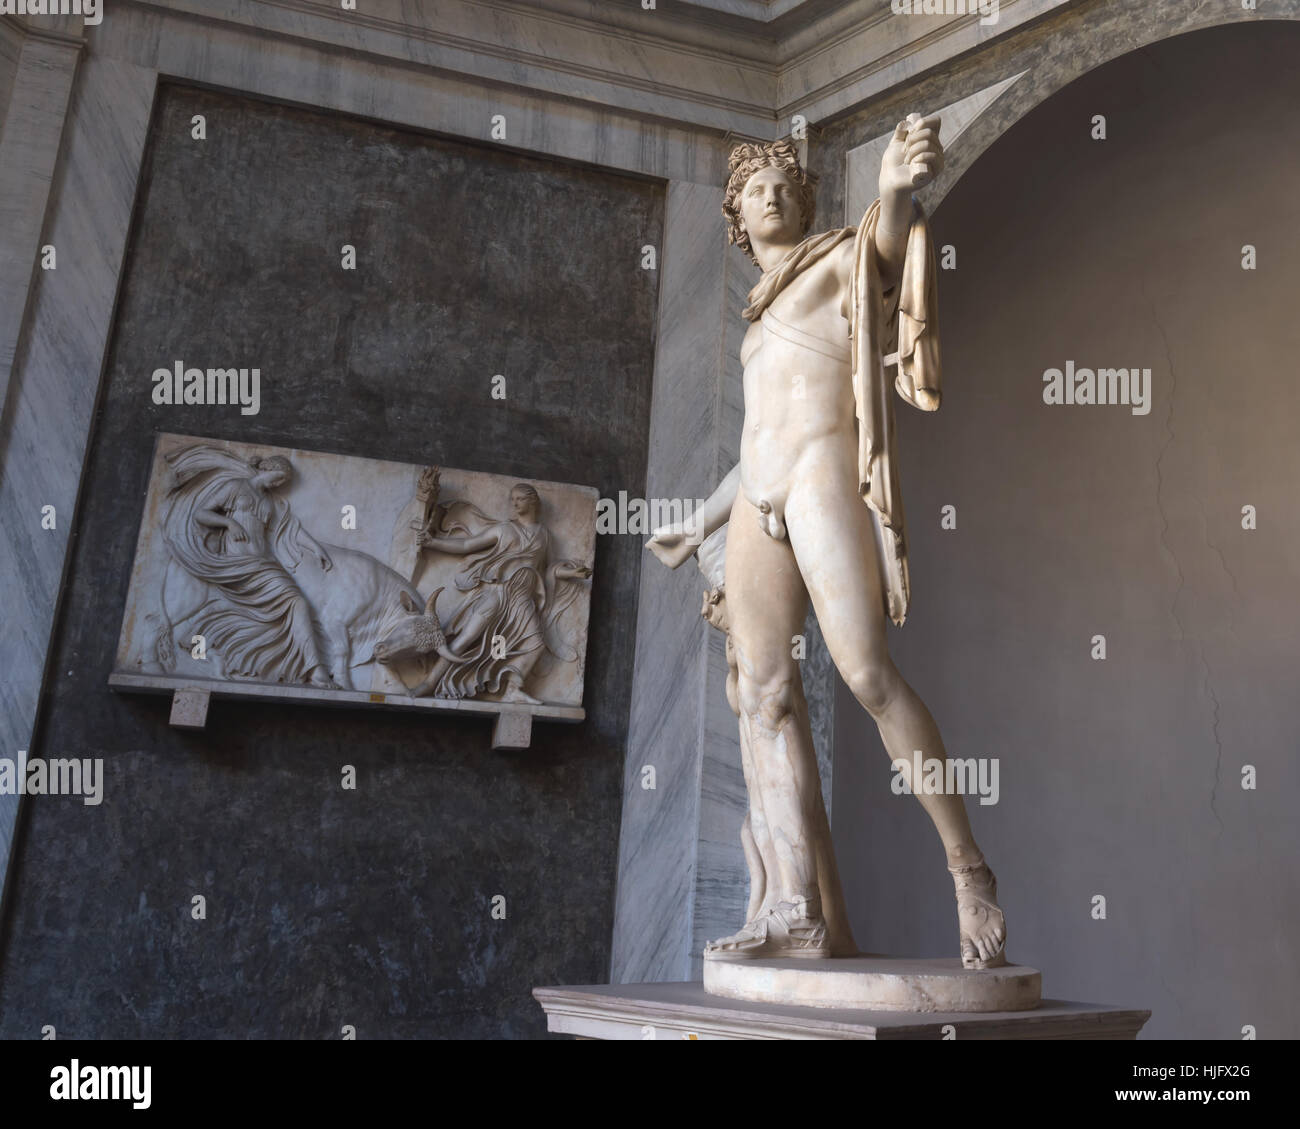 The Apollo of the Belvedere celebrated marble sculpture , Rome, Vatican museum, Italy, Europe Stock Photo